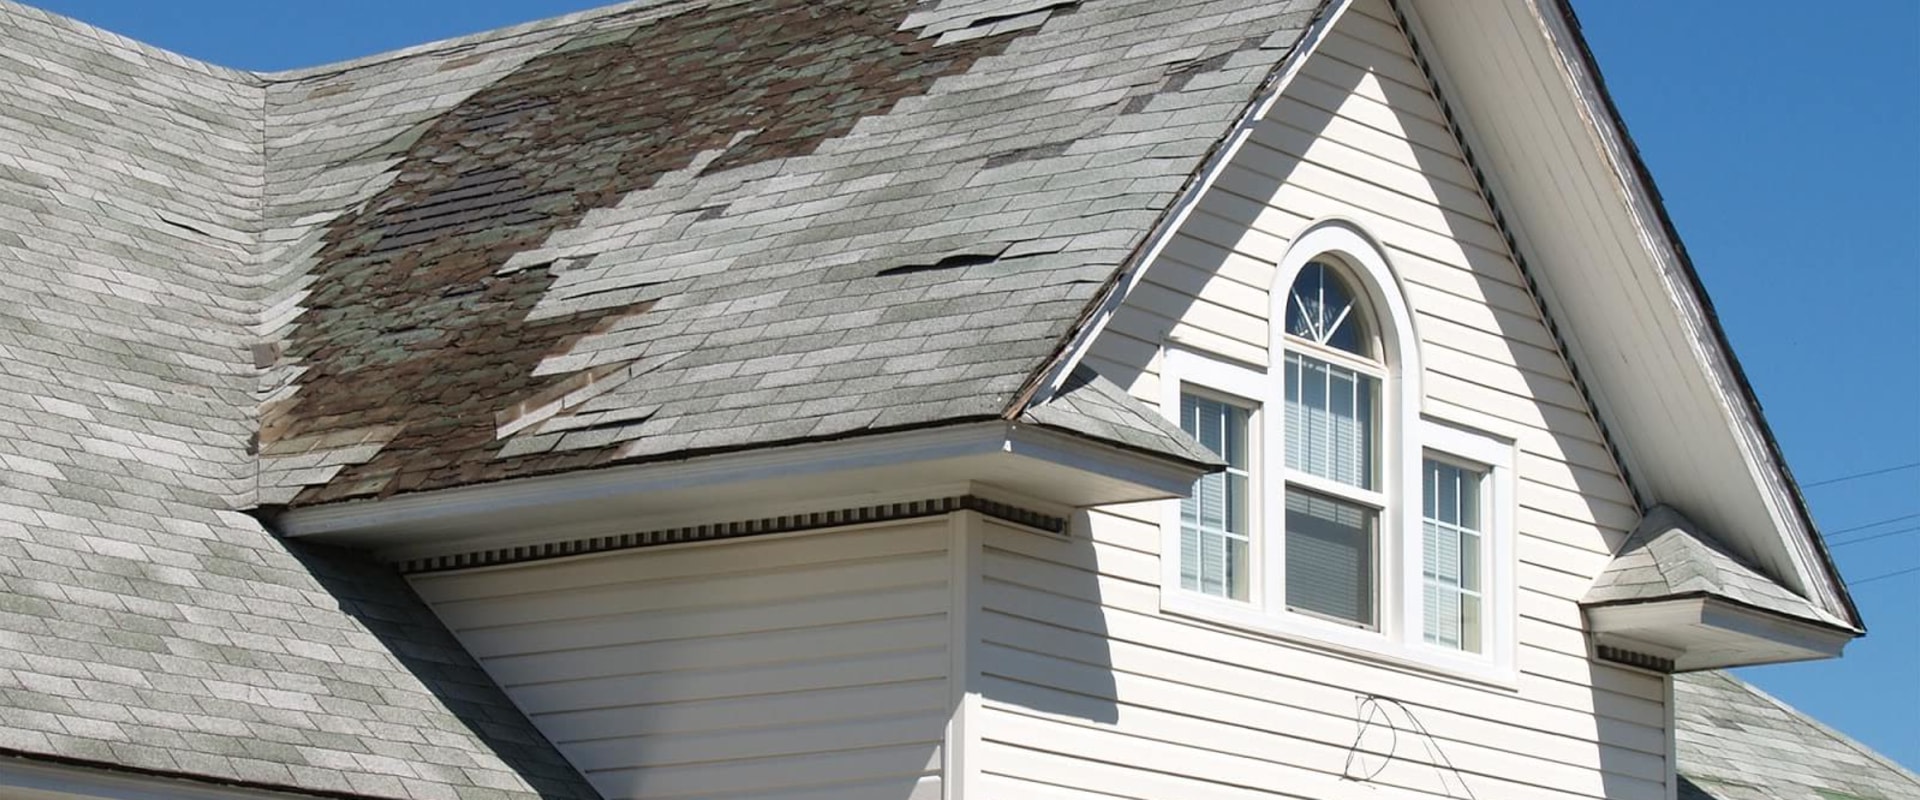 Common Roof Problems: 10 Most Common Roof Repair Issues and How to Avoid Them